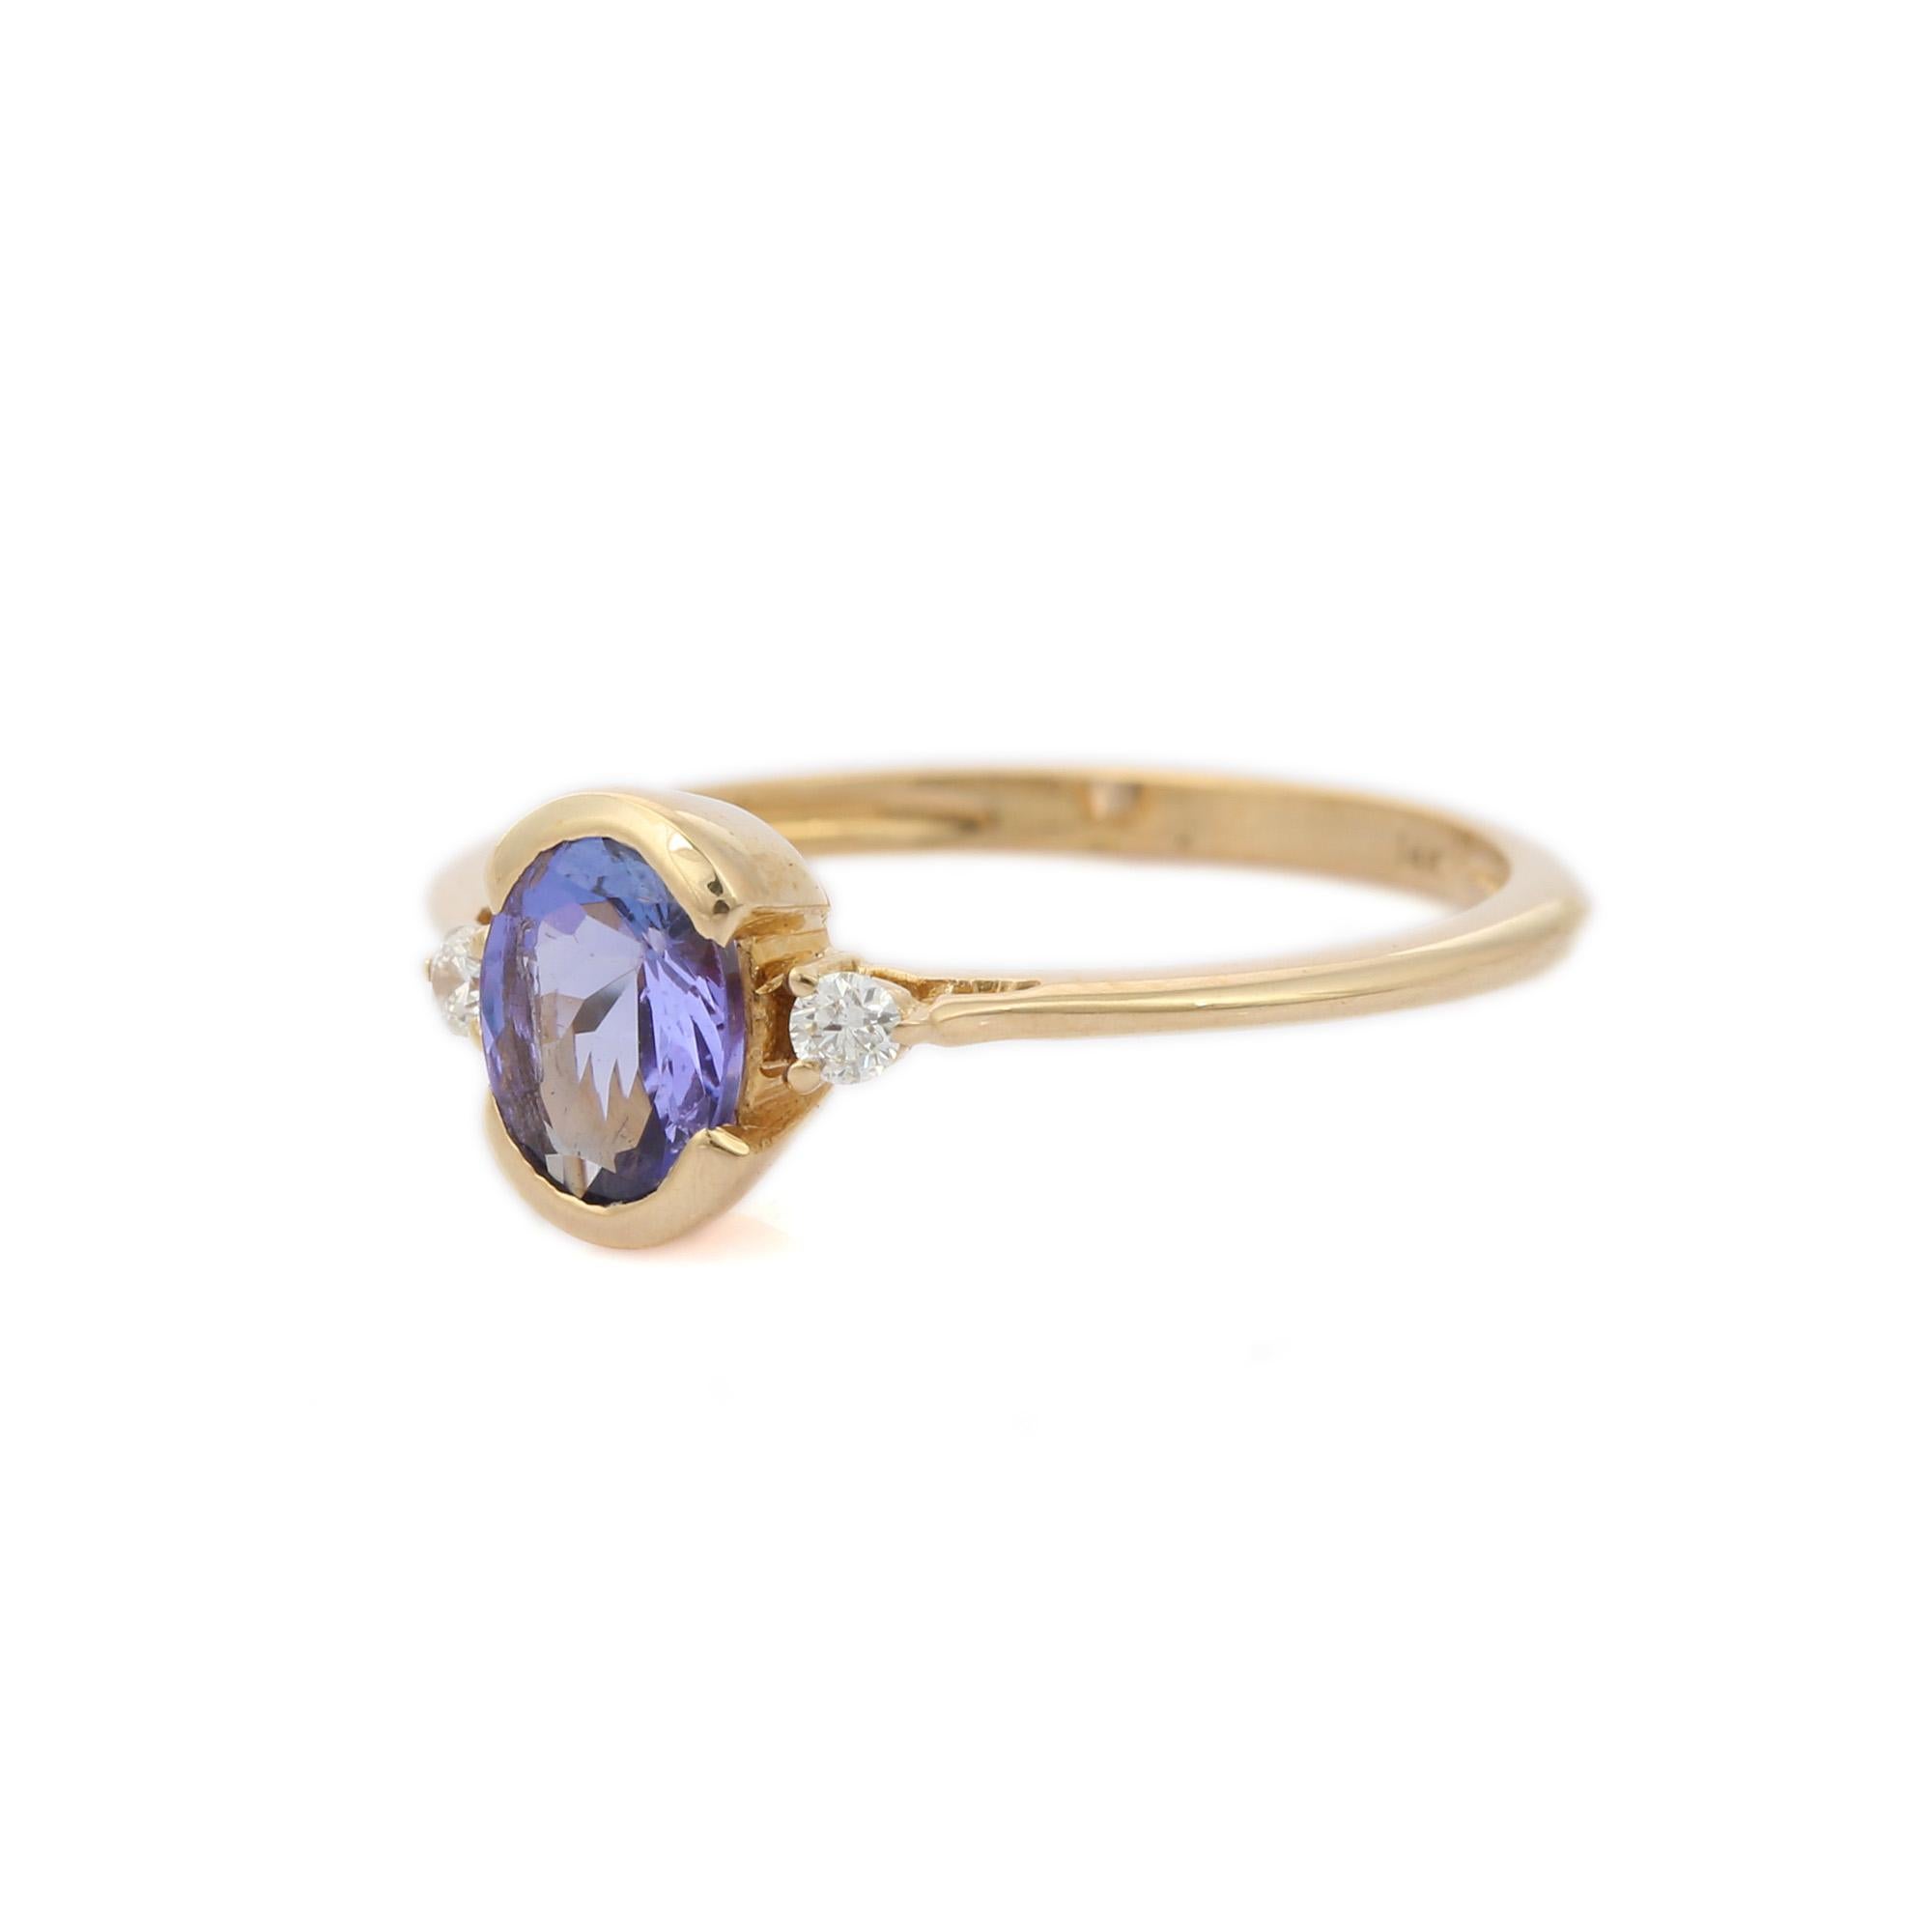 For Sale:  Certified 0.8 Carat Tanzanite and Diamond Dainty Ring in 14K Yellow Gold 2